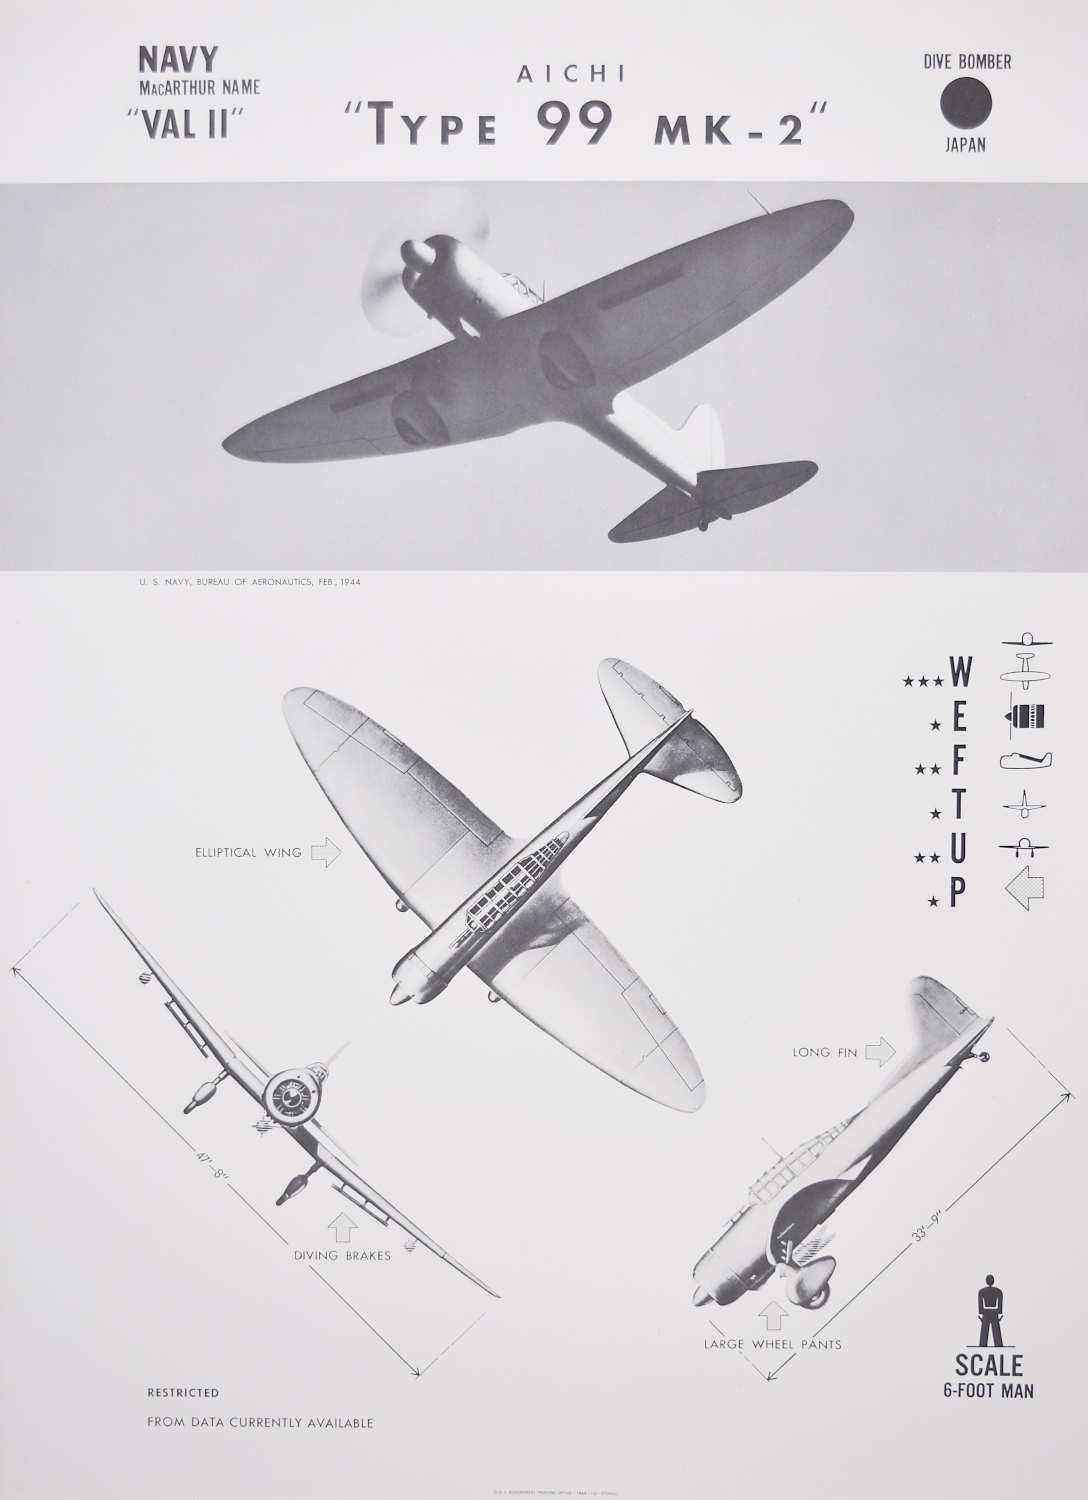 1942 Japan Aichi Val II "Type 99 MK-2" dive bomber plane poster WW2 - Print by Unknown